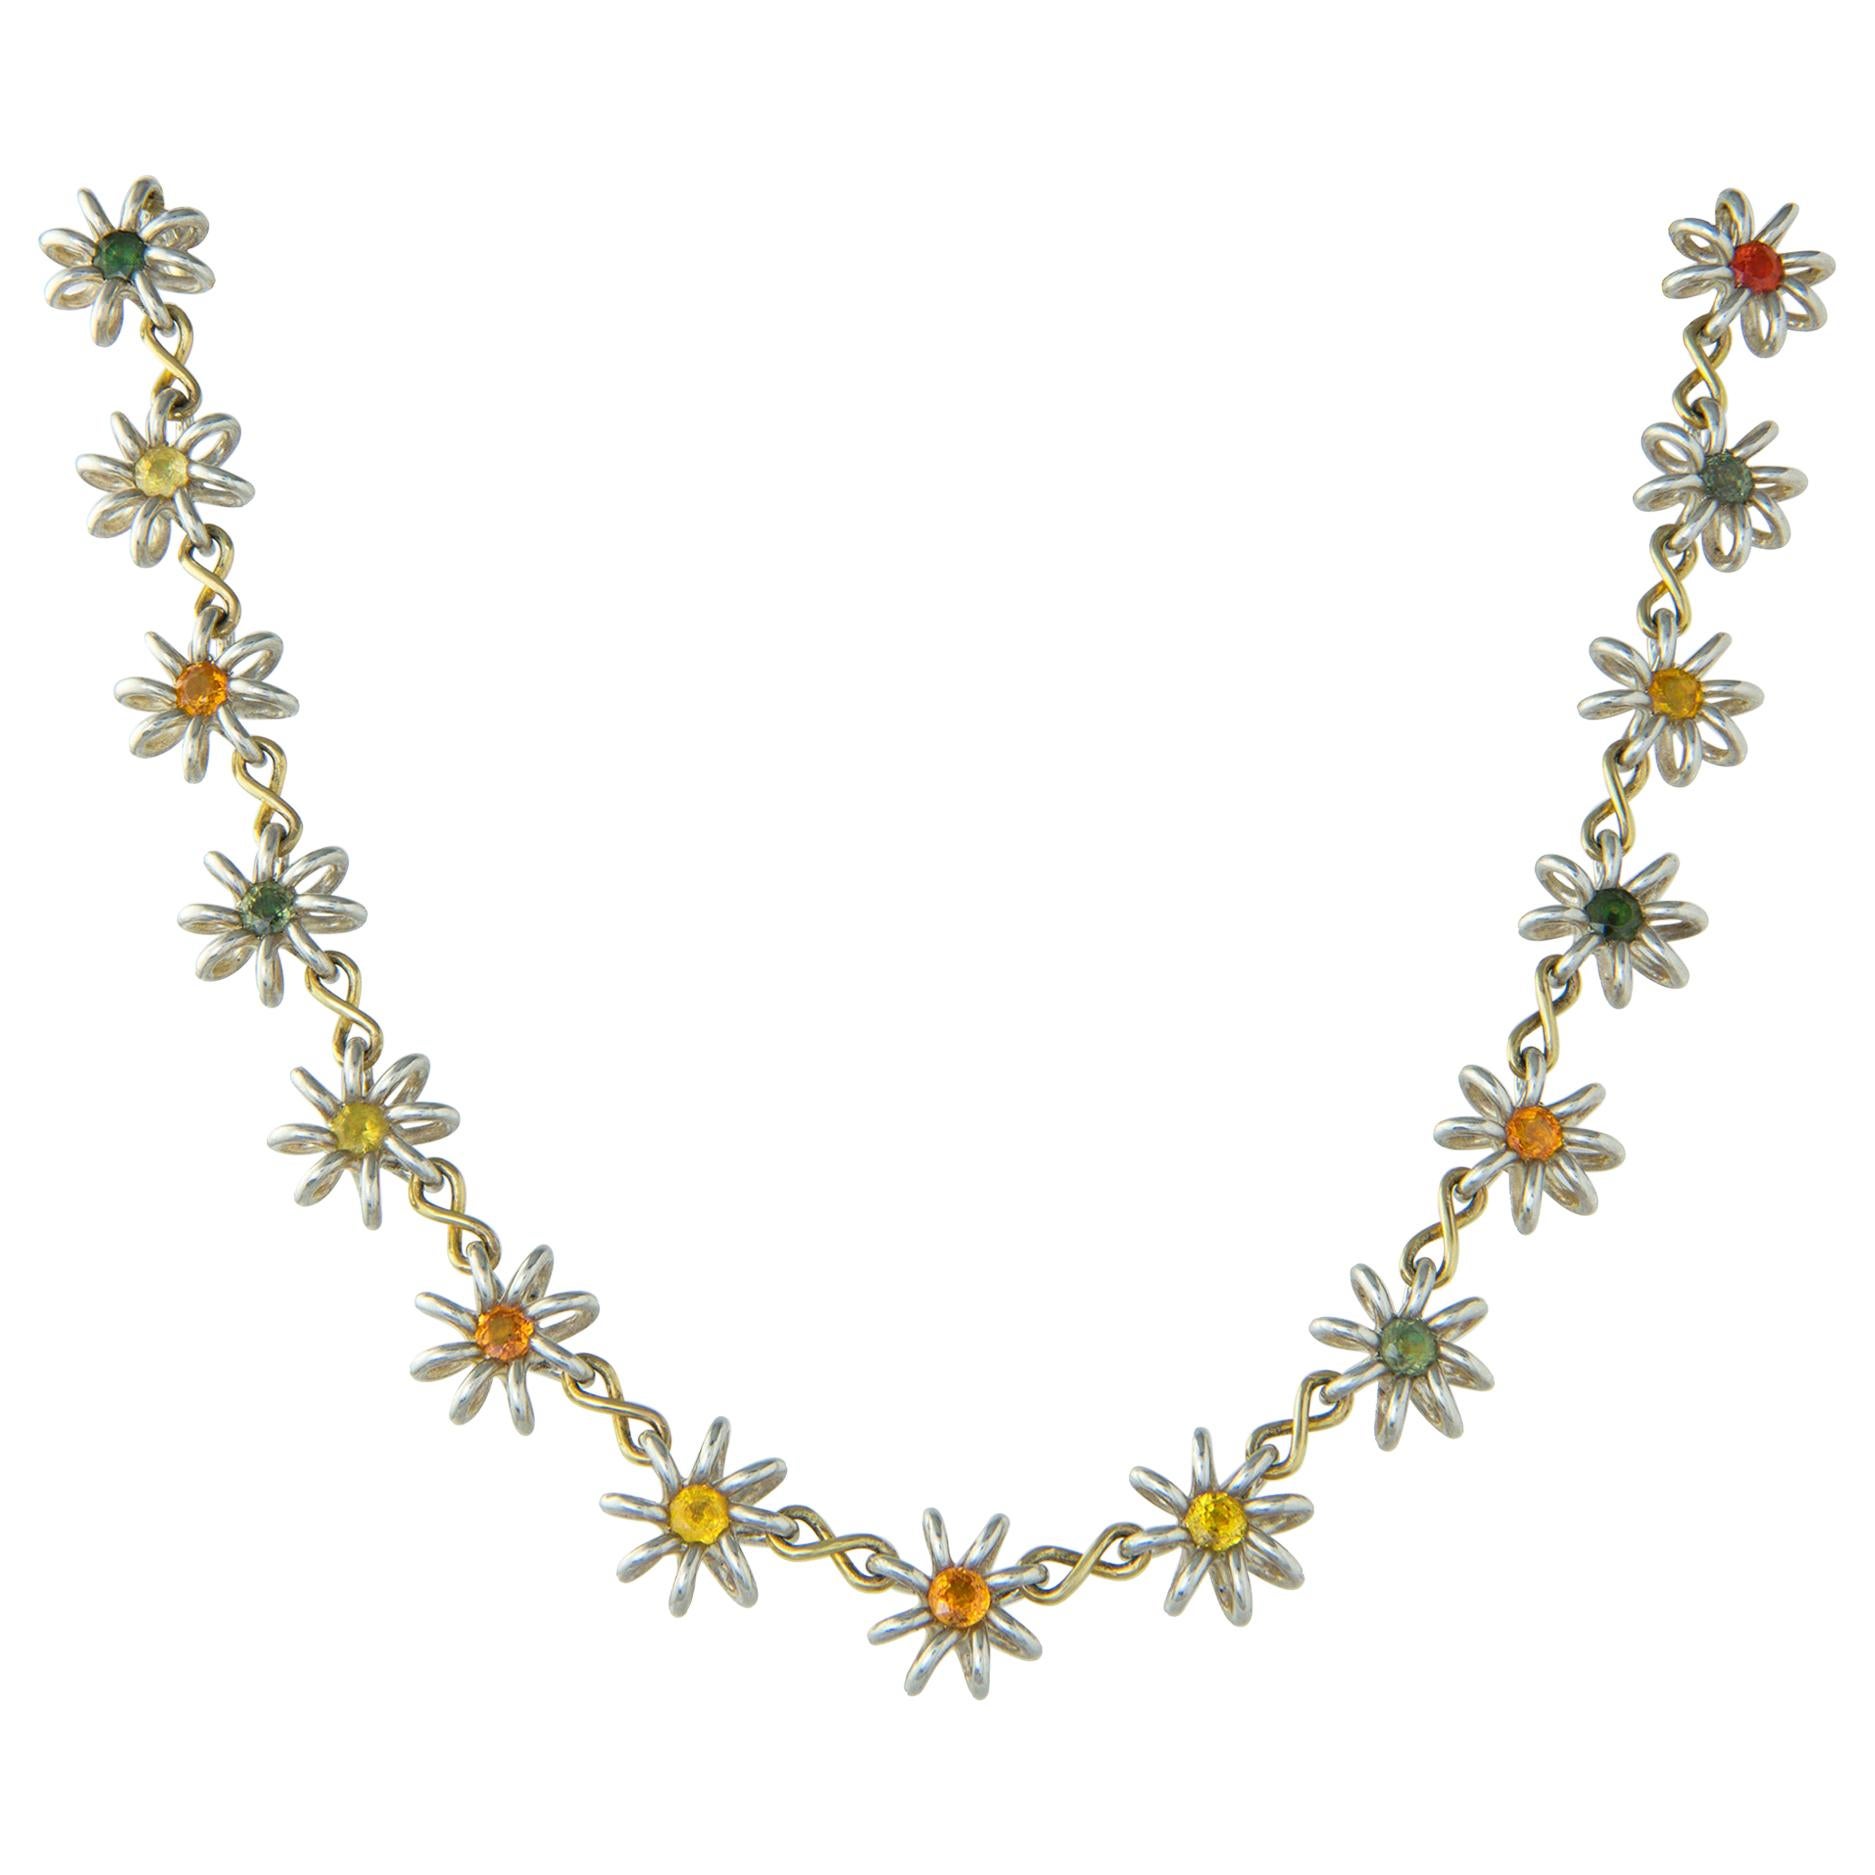 Handmade Silver and Gold Necklace by Lucie Heskett-Brem